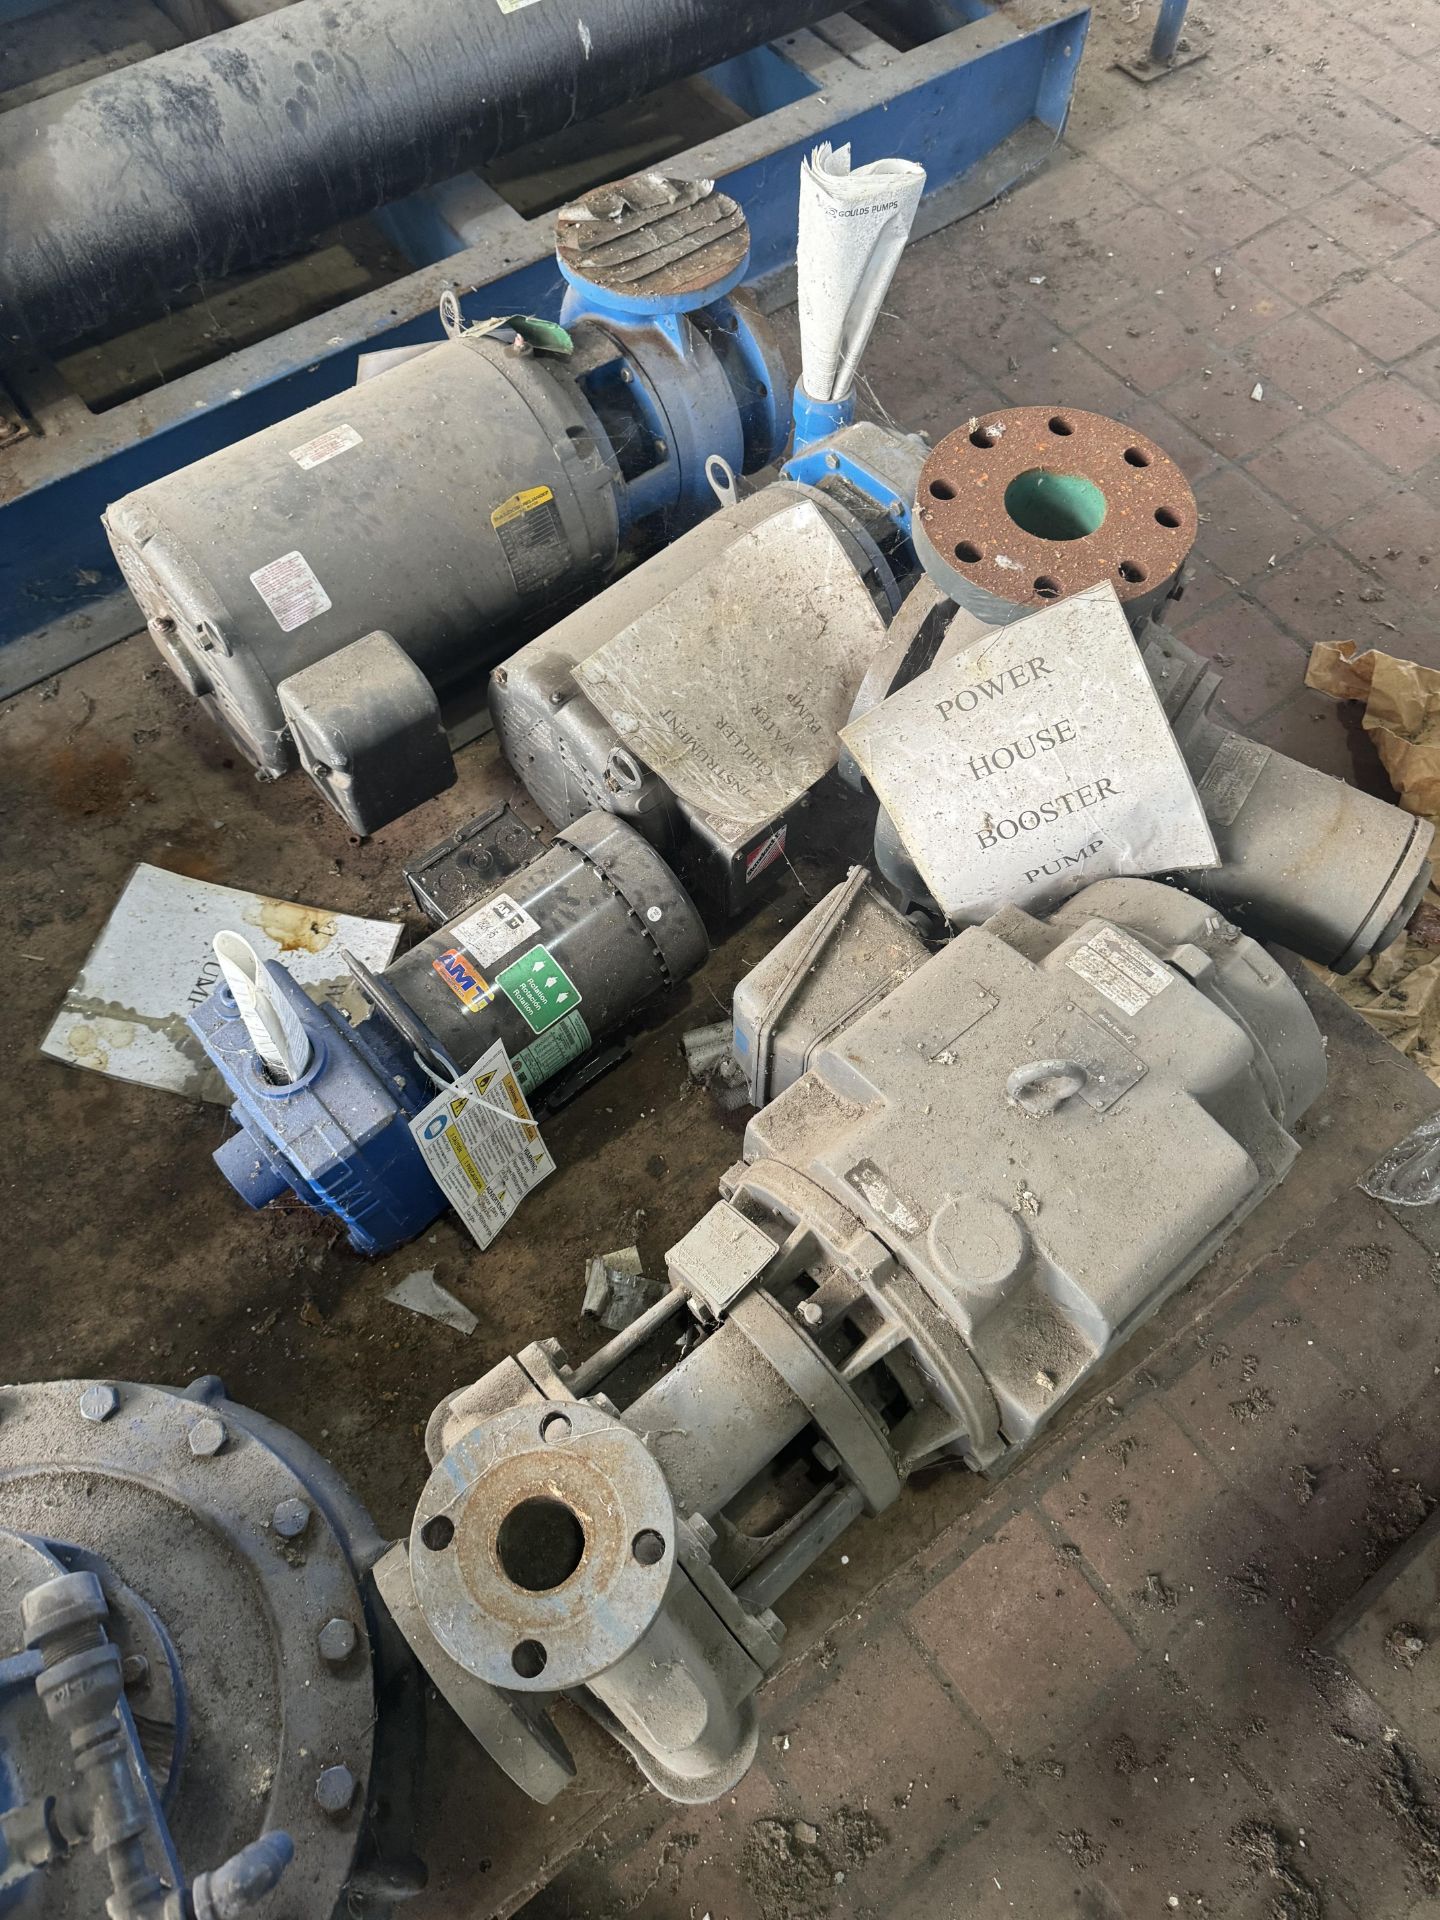 Pallet of Miscellaneous Motors and Pumps, Rigging/ Removal Fee - $75 - Image 4 of 5